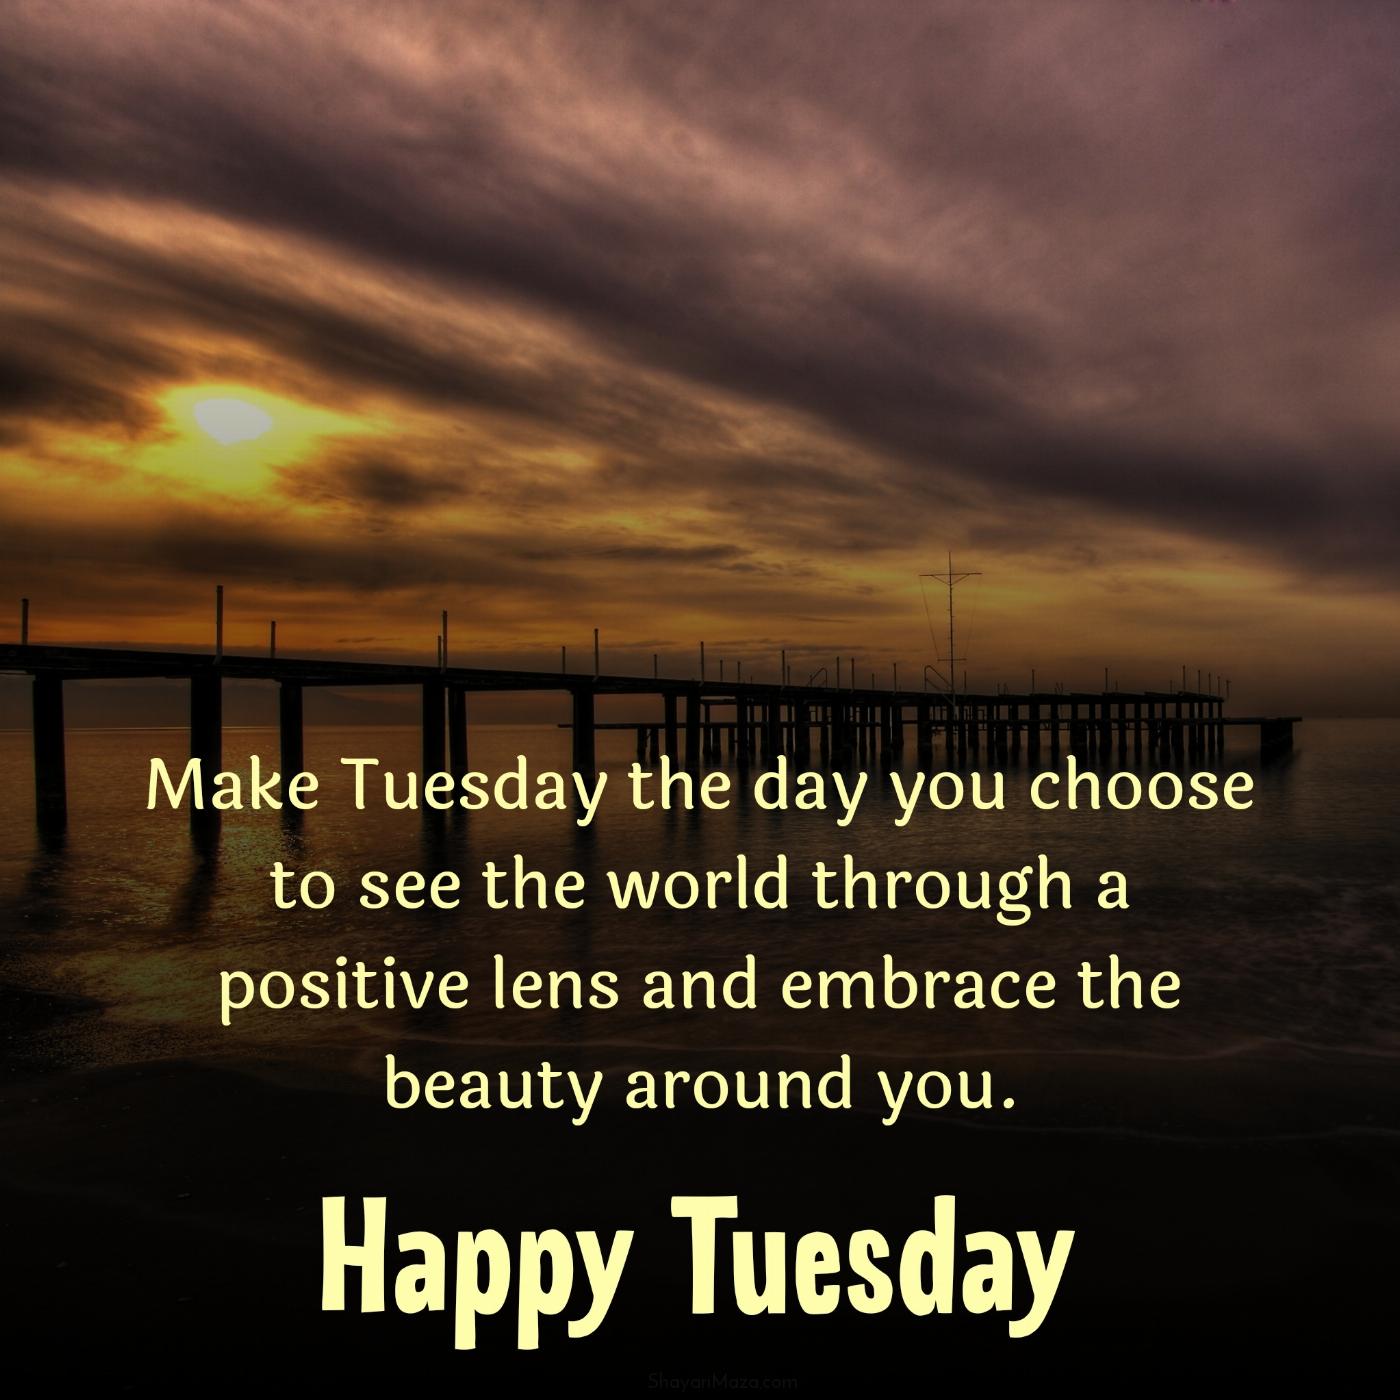 Make Tuesday the day you choose to see the world